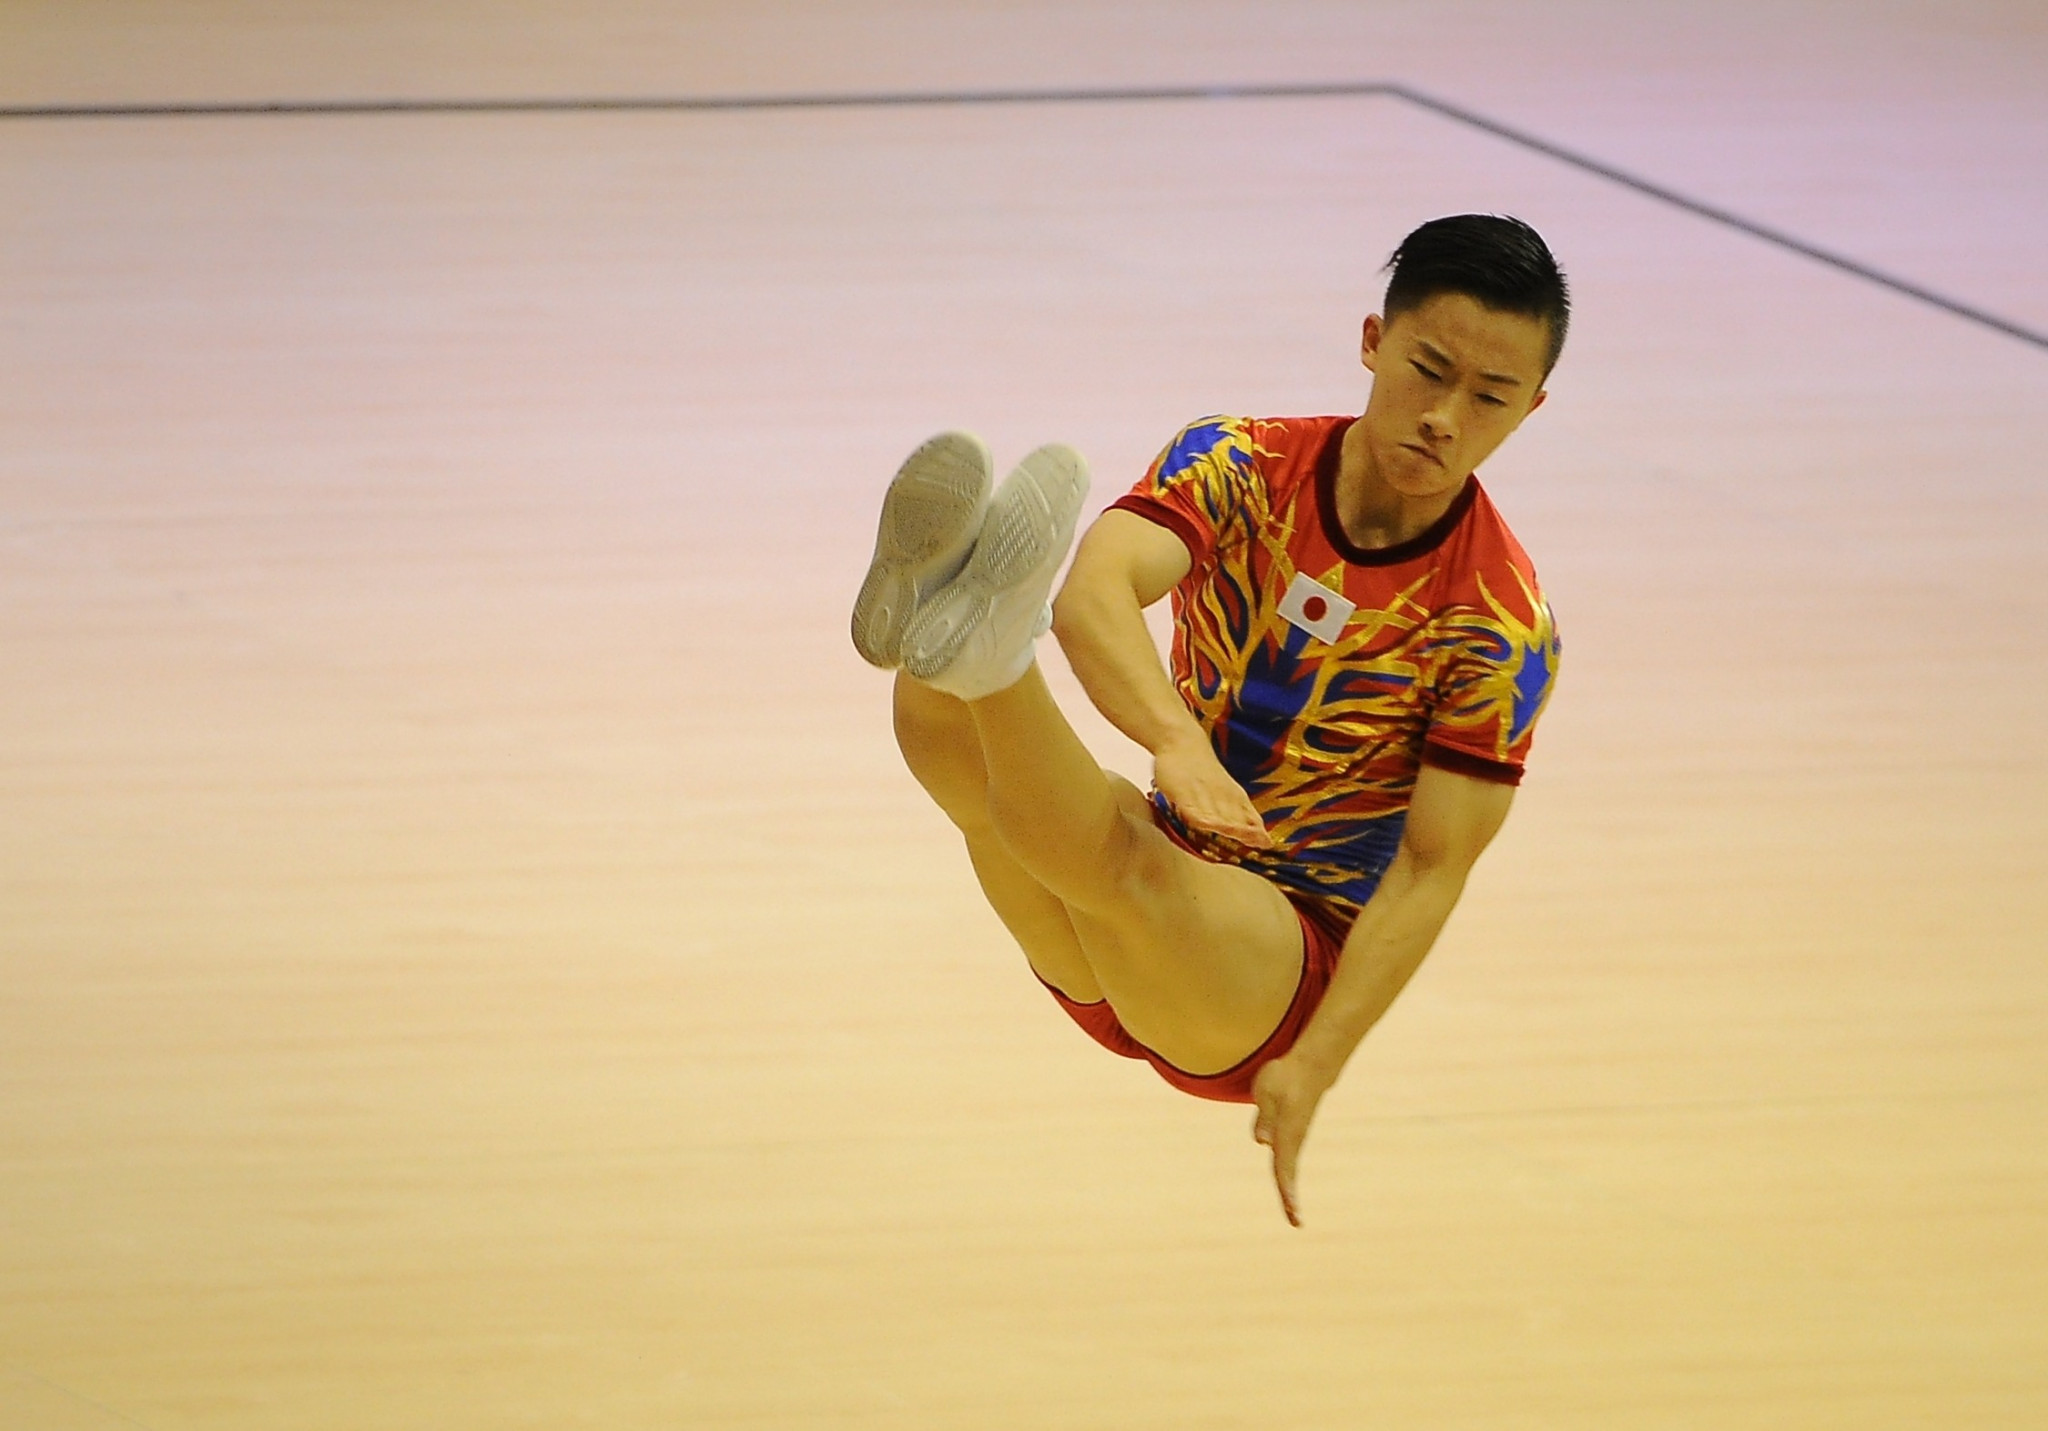 Japan's Mizuki Saito will compete in front of a home crowd at the FIG Aerobic World Cup ©Getty Images